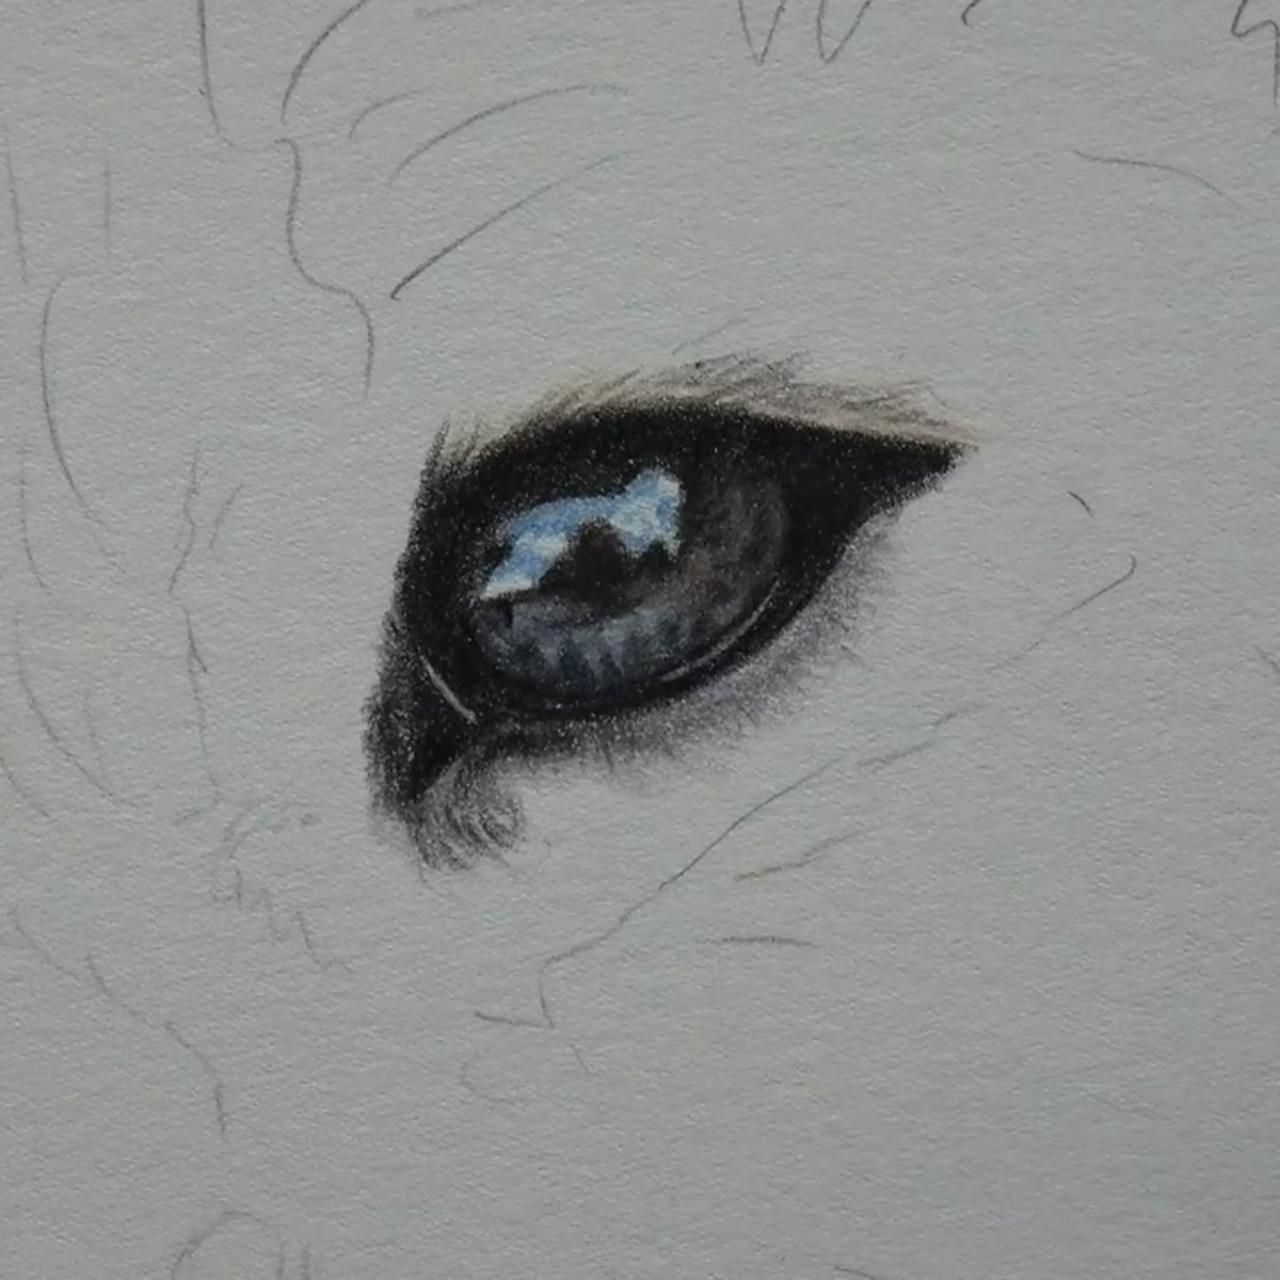 How to draw glassy animal eyes in coloured pencil, bonny snowdon academy | online art lessons